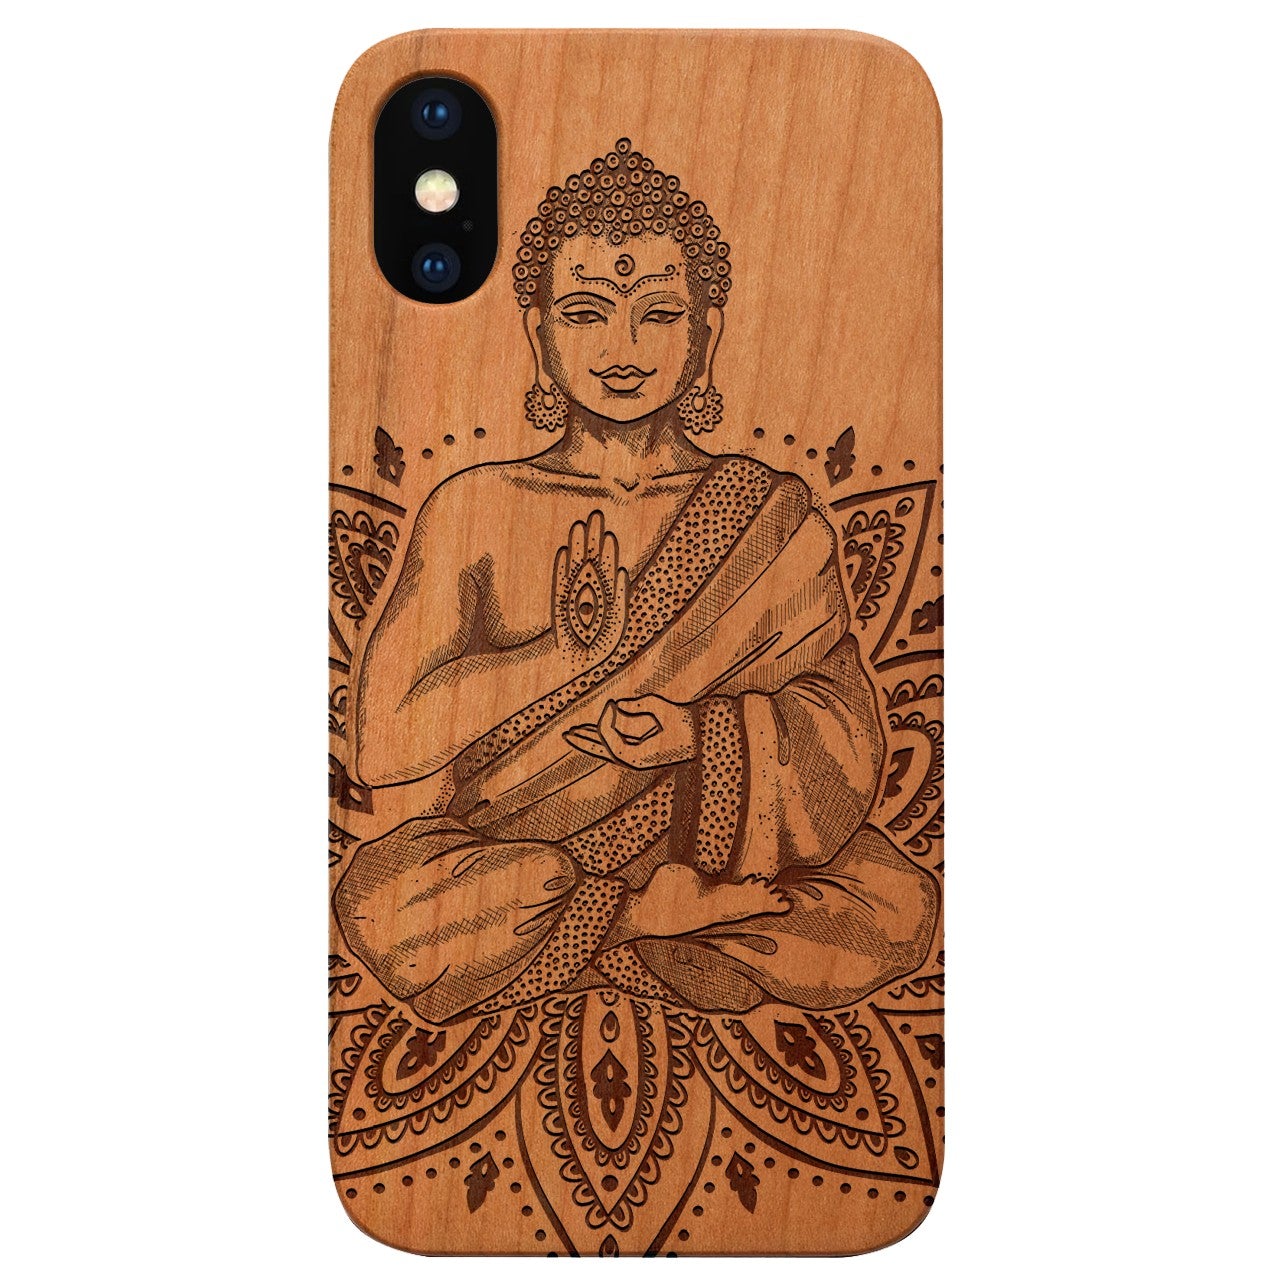  Buddha 2 - Engraved - Wooden Phone Case - IPhone 13 Models